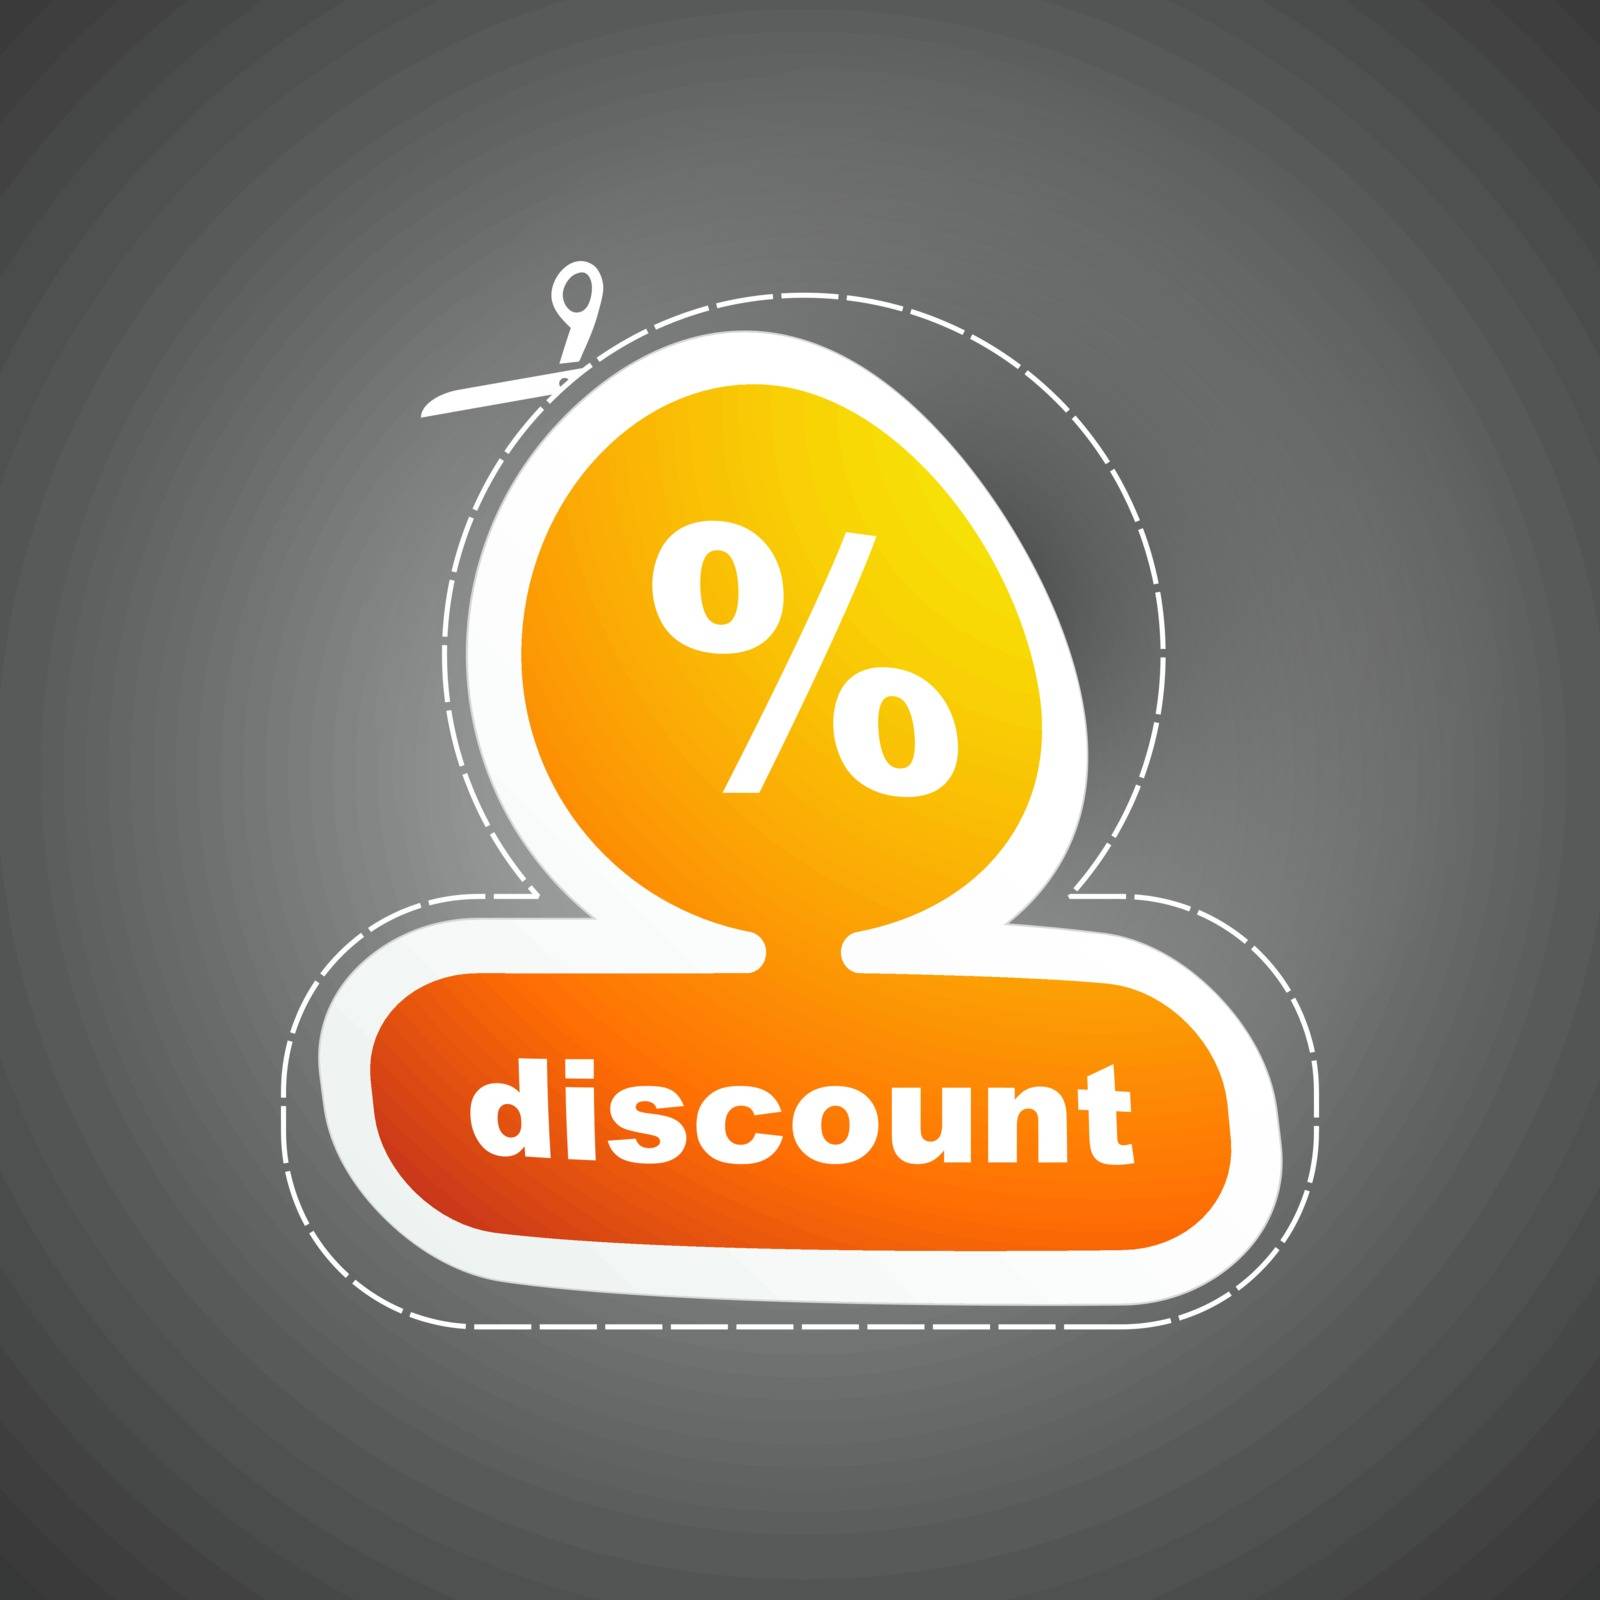 Discount signs by login